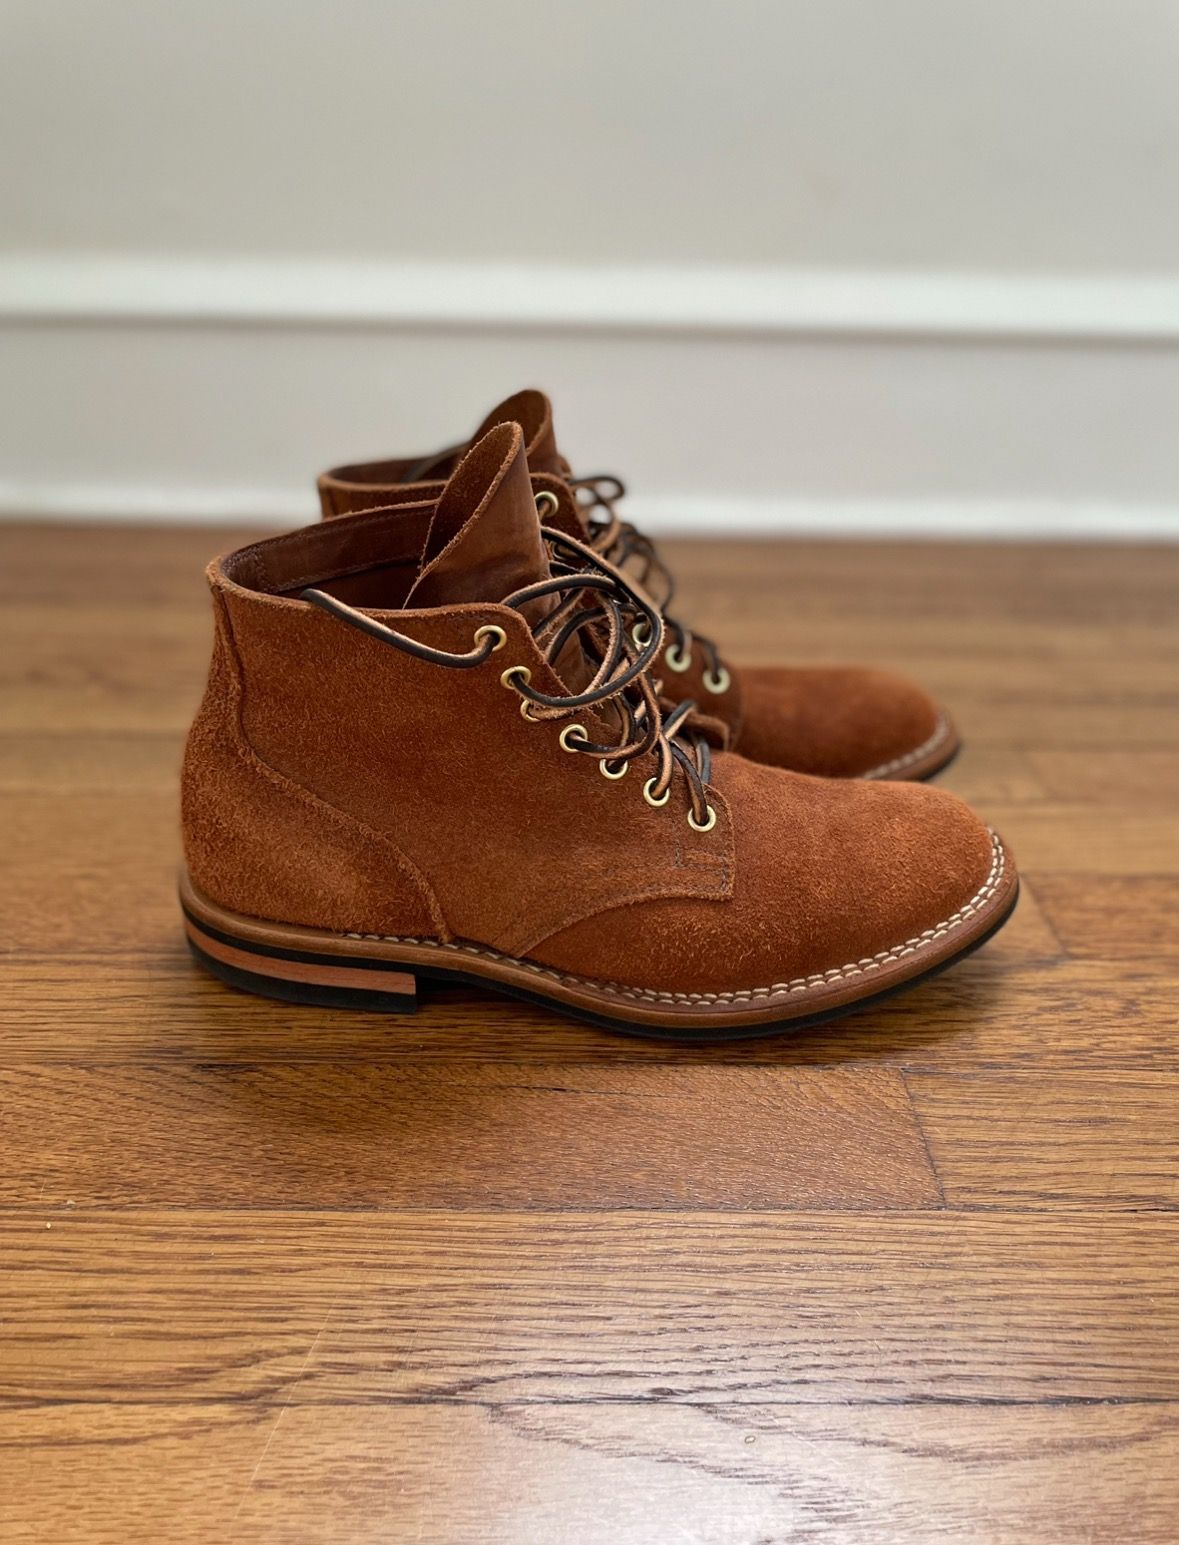 Pre-owned Viberg Service Boot In Aged Bark Roughout In Brown